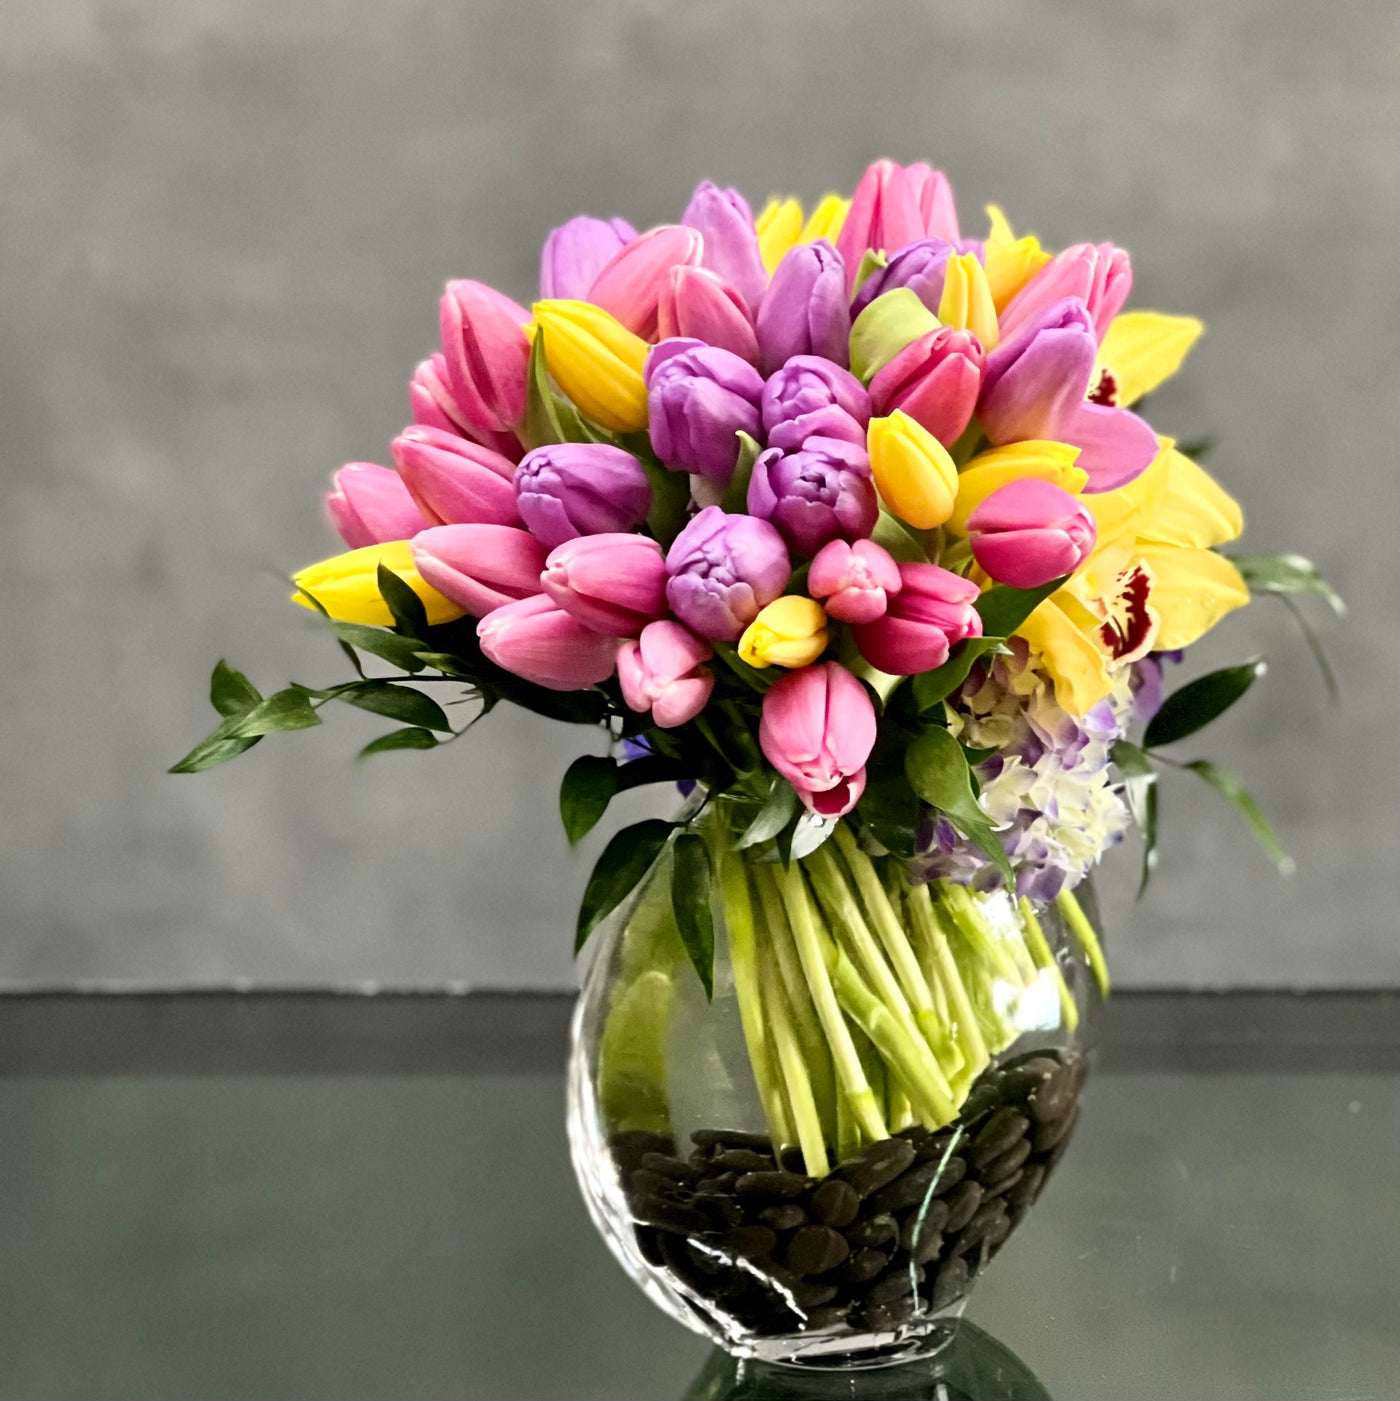 Here's a spring-tastic way to brighten someone's day from Beverly Hills Florist. With our same day delivery arrangement placed in a glass vase of beautiful Tulips, Orchids and Hydrangeas, it makes a delightful decoration for a table, or any corner of the home office that could use a little magic.